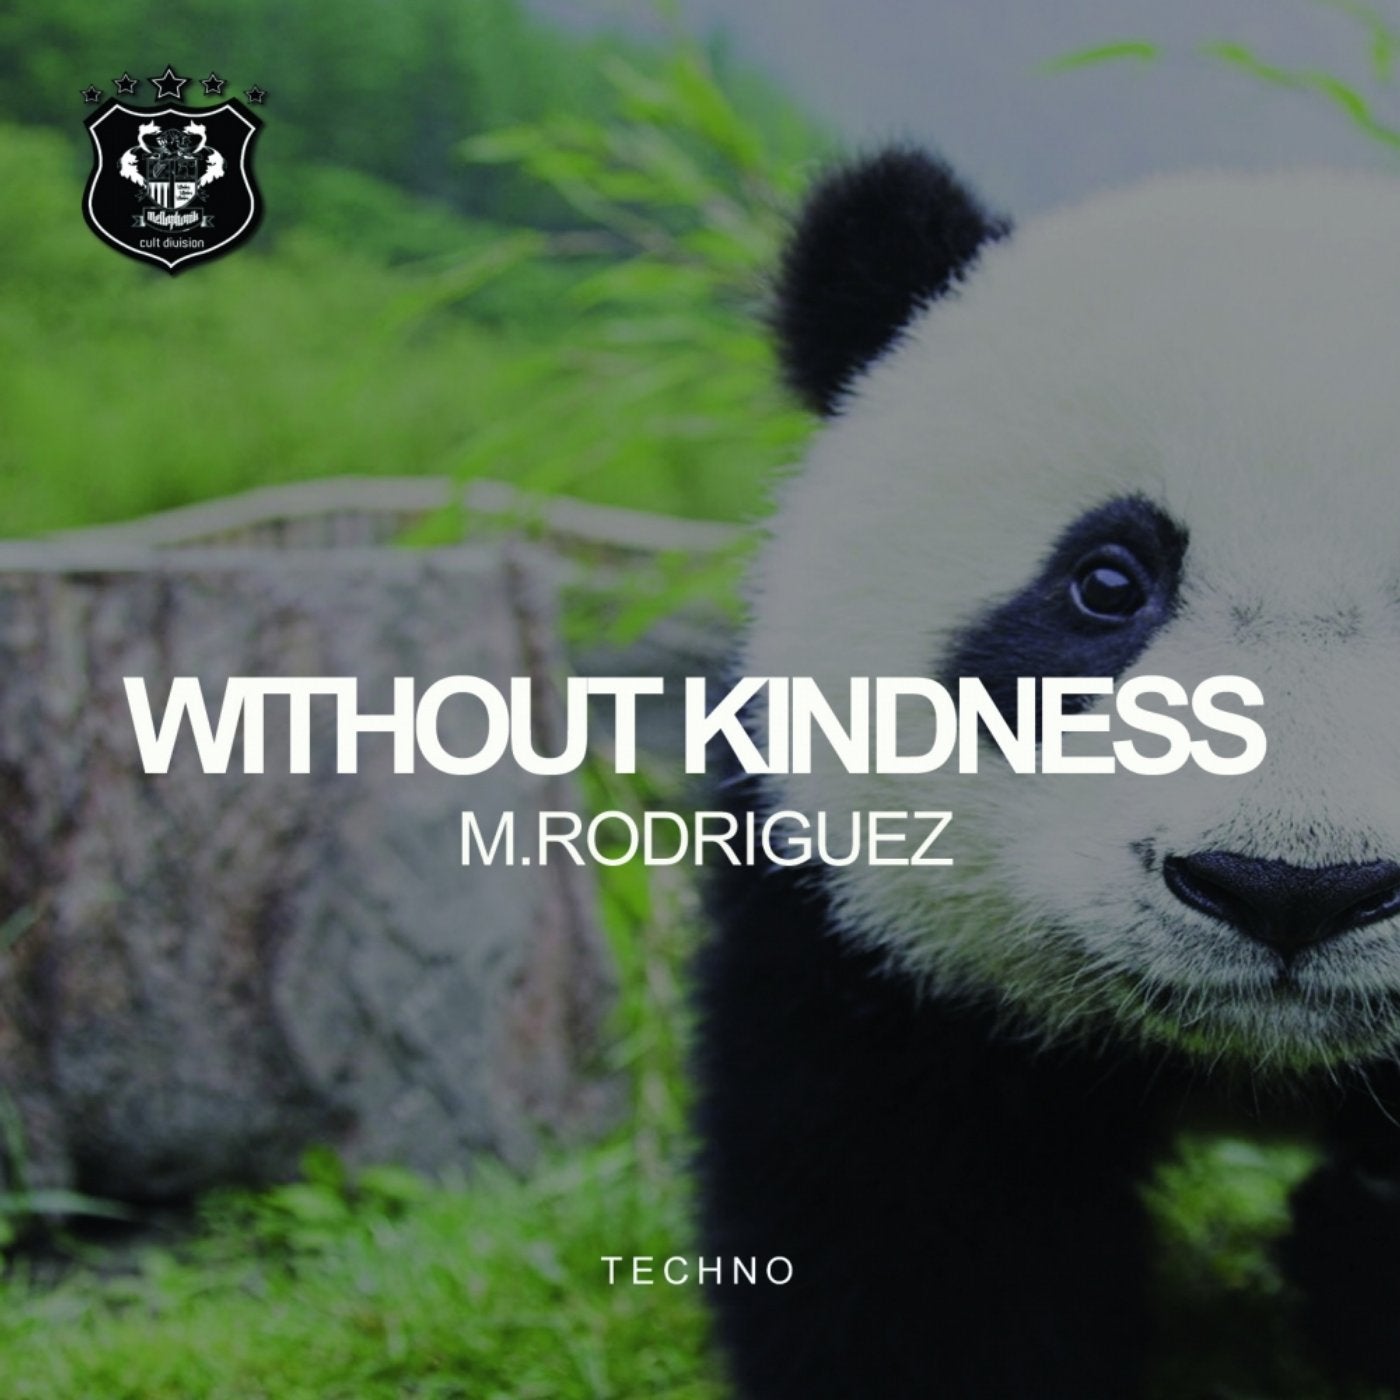 Without Kindness